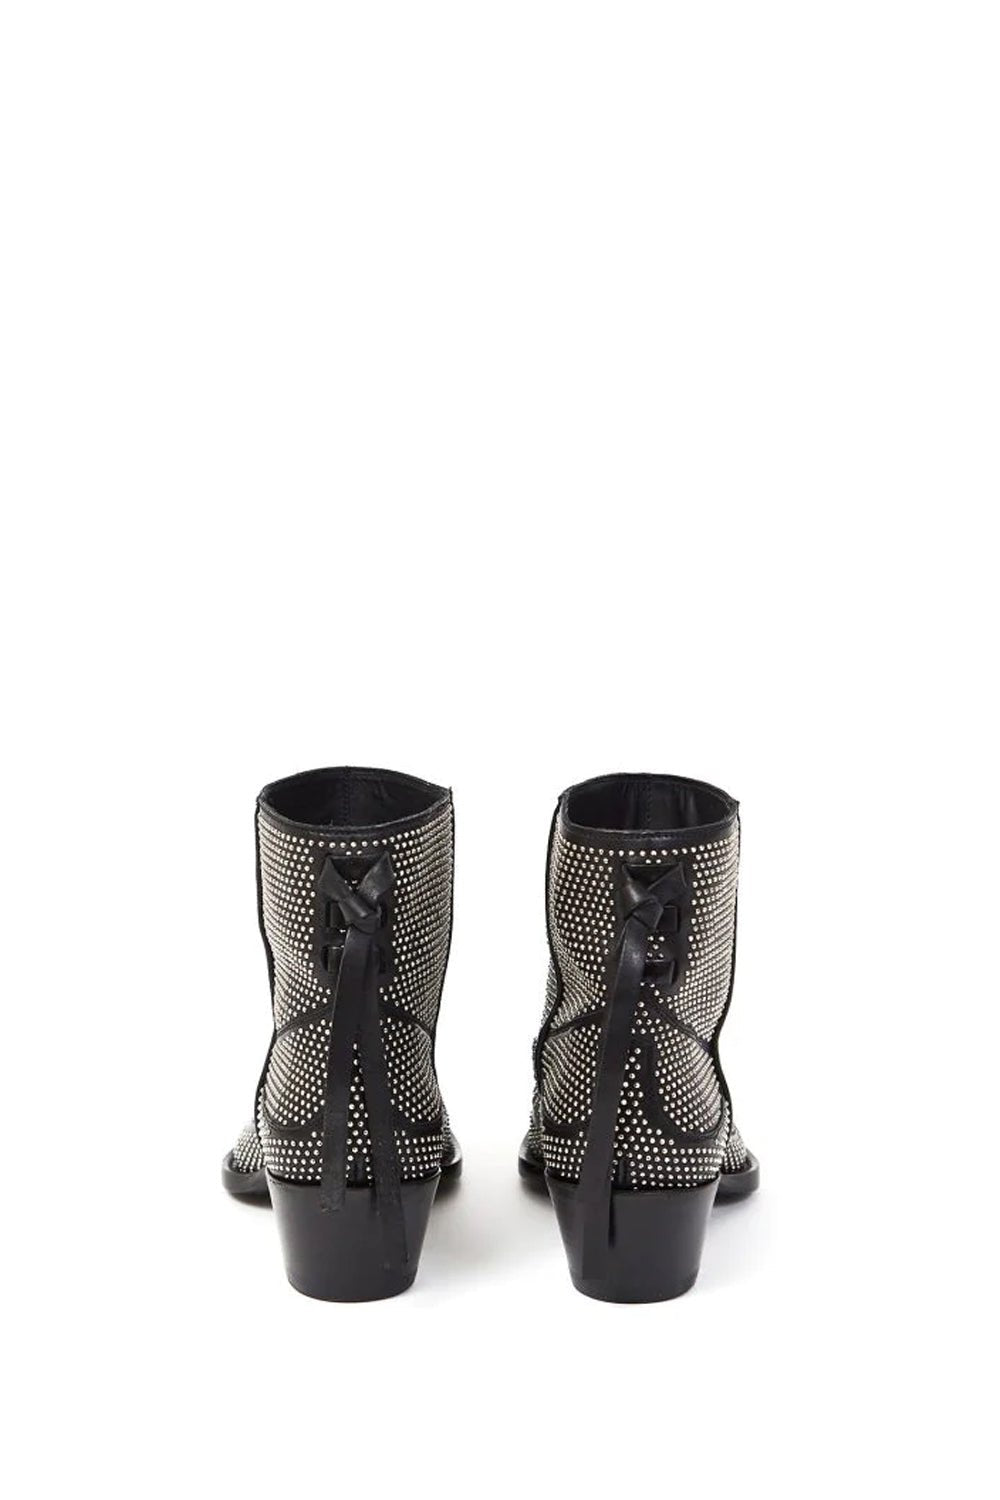 LOW TEXANO BOOT Black leather Texas boots. Metallic square toe. Braiding on the back. Heel 5 cm. Made in Italy. HTC LOS ANGELES